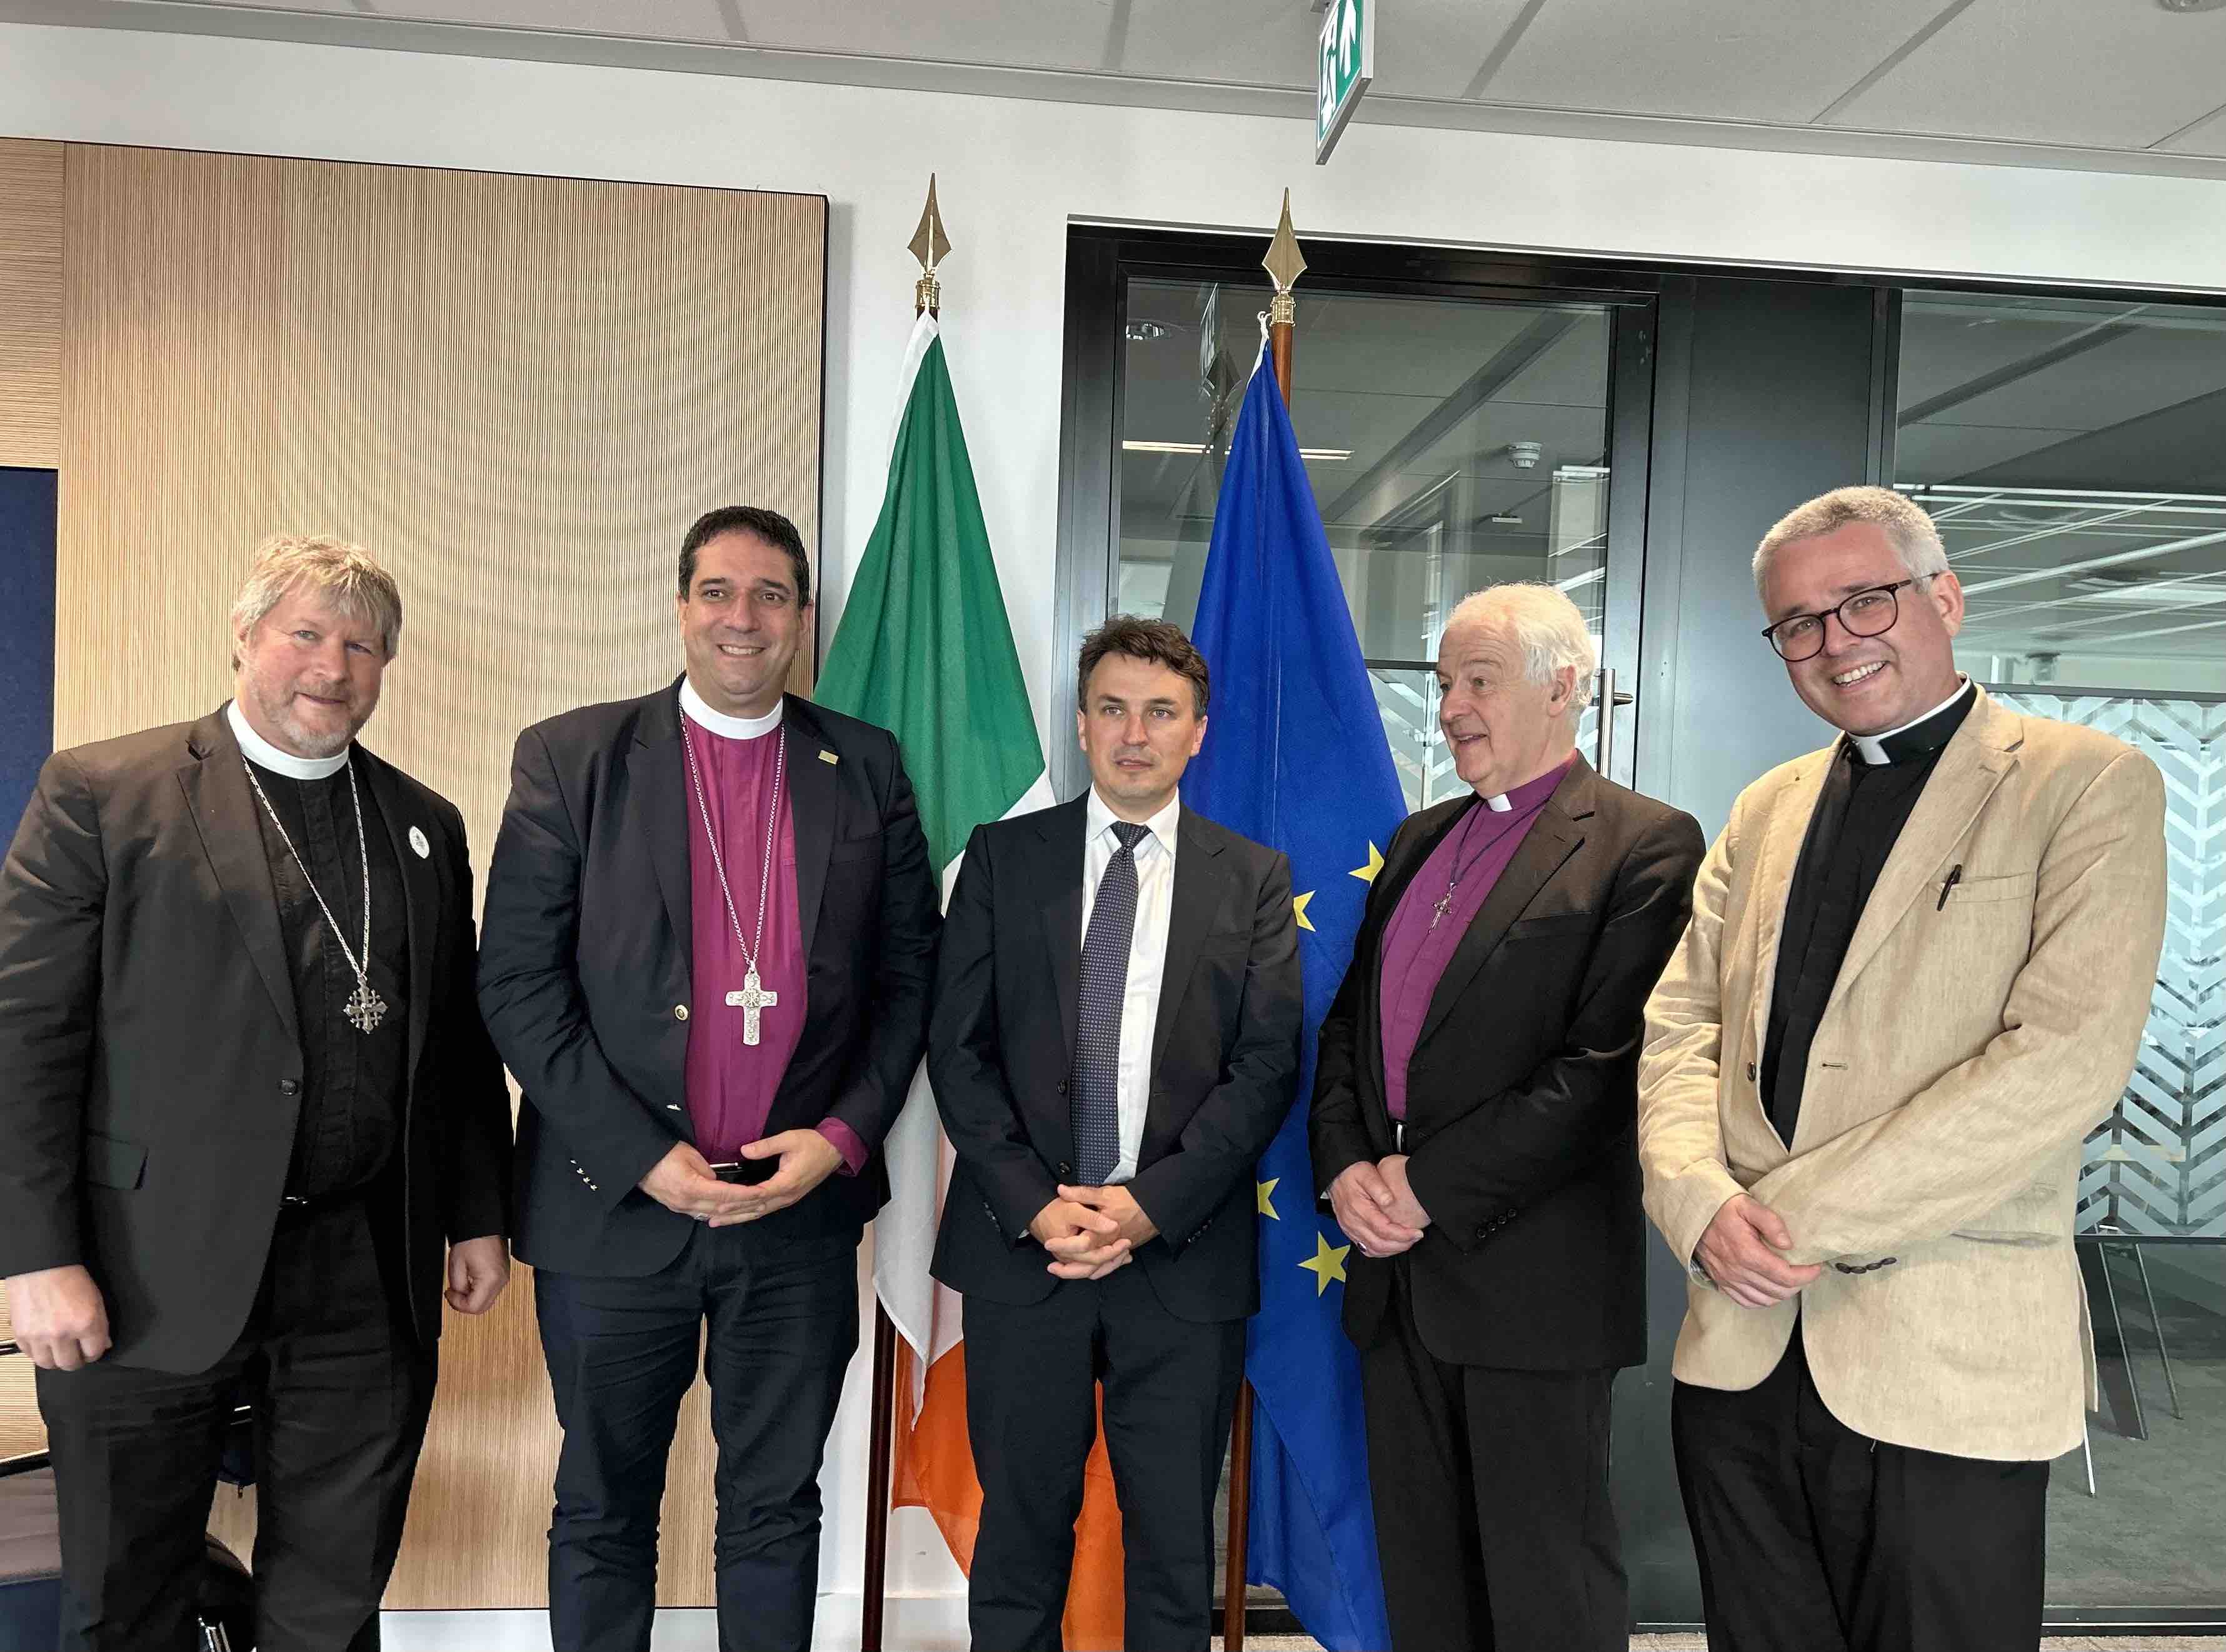 Canon Don Binder, Archbishop Hosam Naoum, Luke Feeney, Archbishop Michael Jackson and Canon Paul Arbuthnot in the Department of Foreign Affairs.